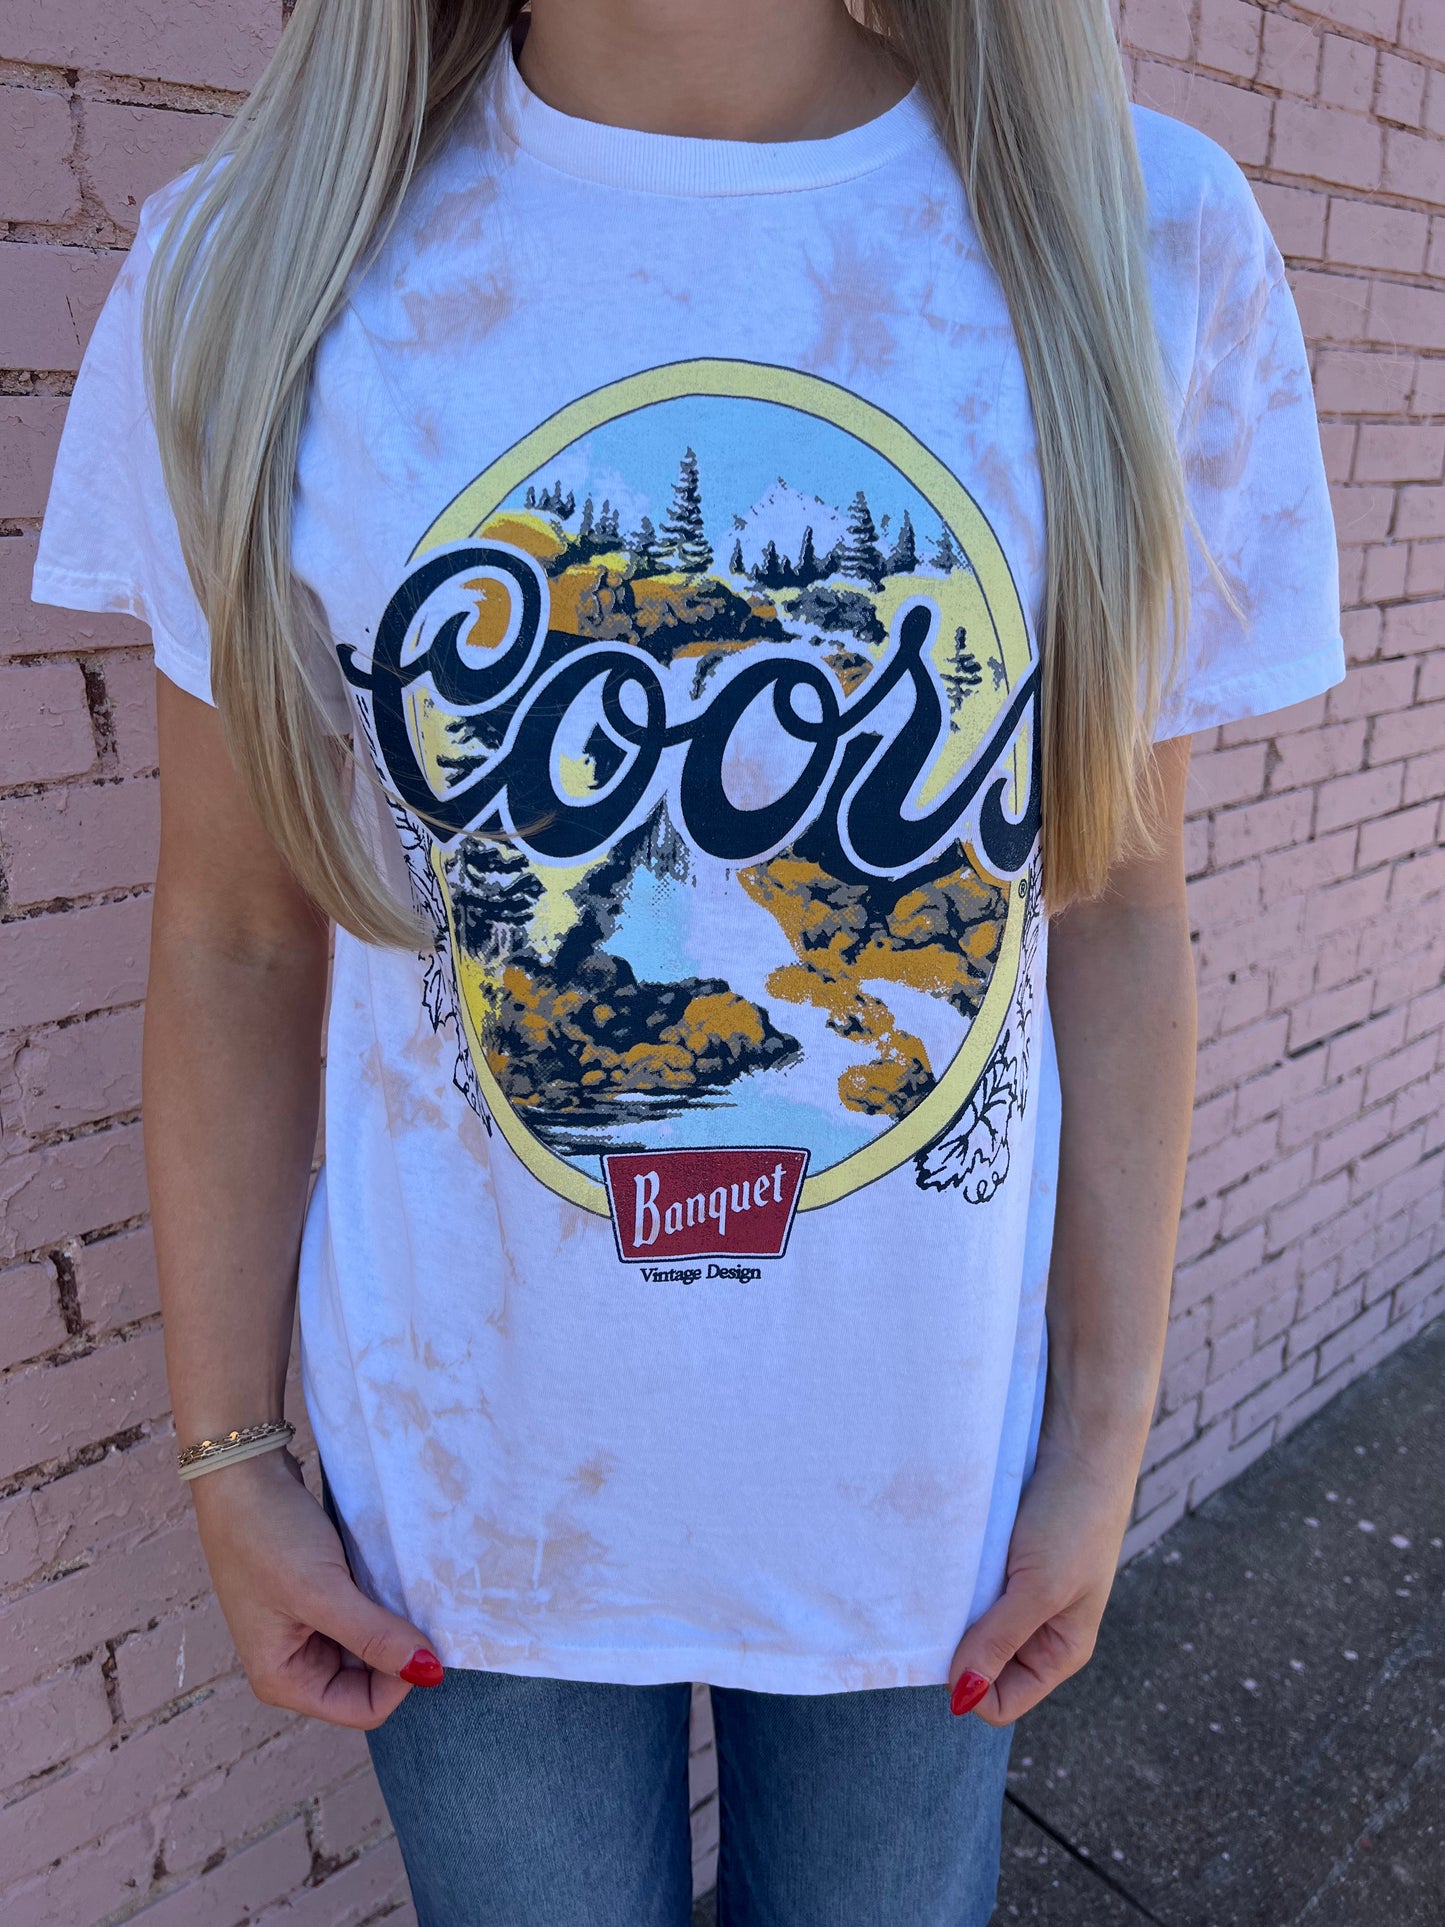 The Coors Banquet Graphic Tee